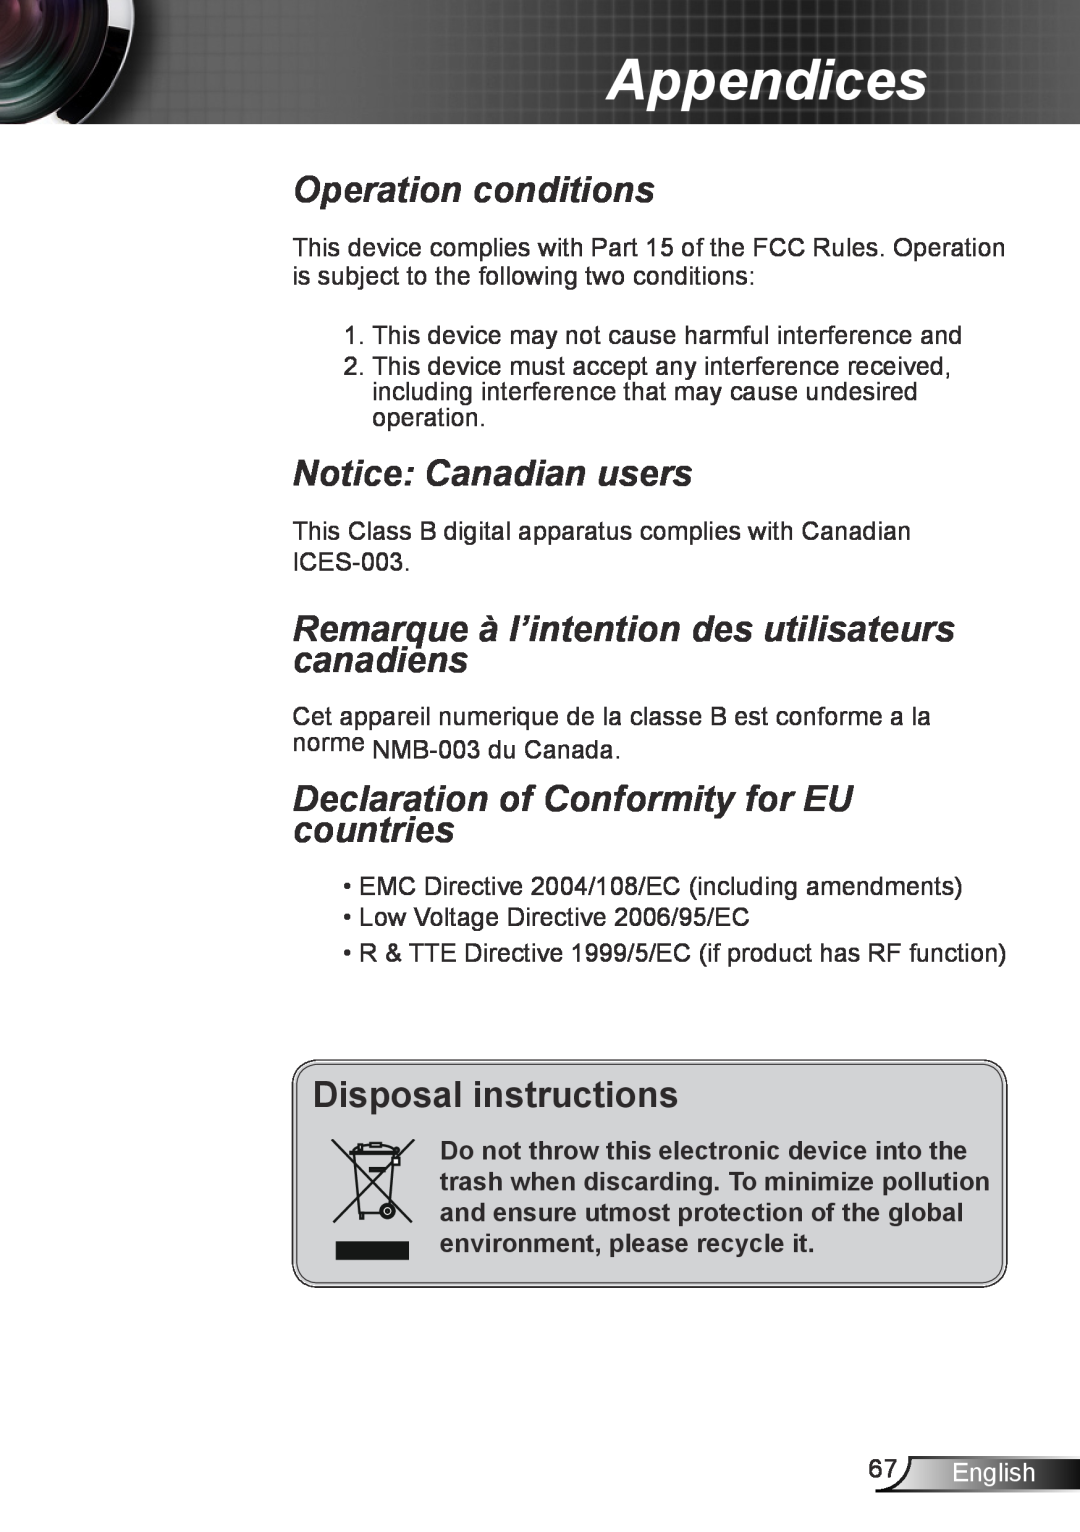 Optoma Technology TW762GOV Operation conditions, Notice Canadian users, Remarque à l’intention des utilisateurs canadiens 